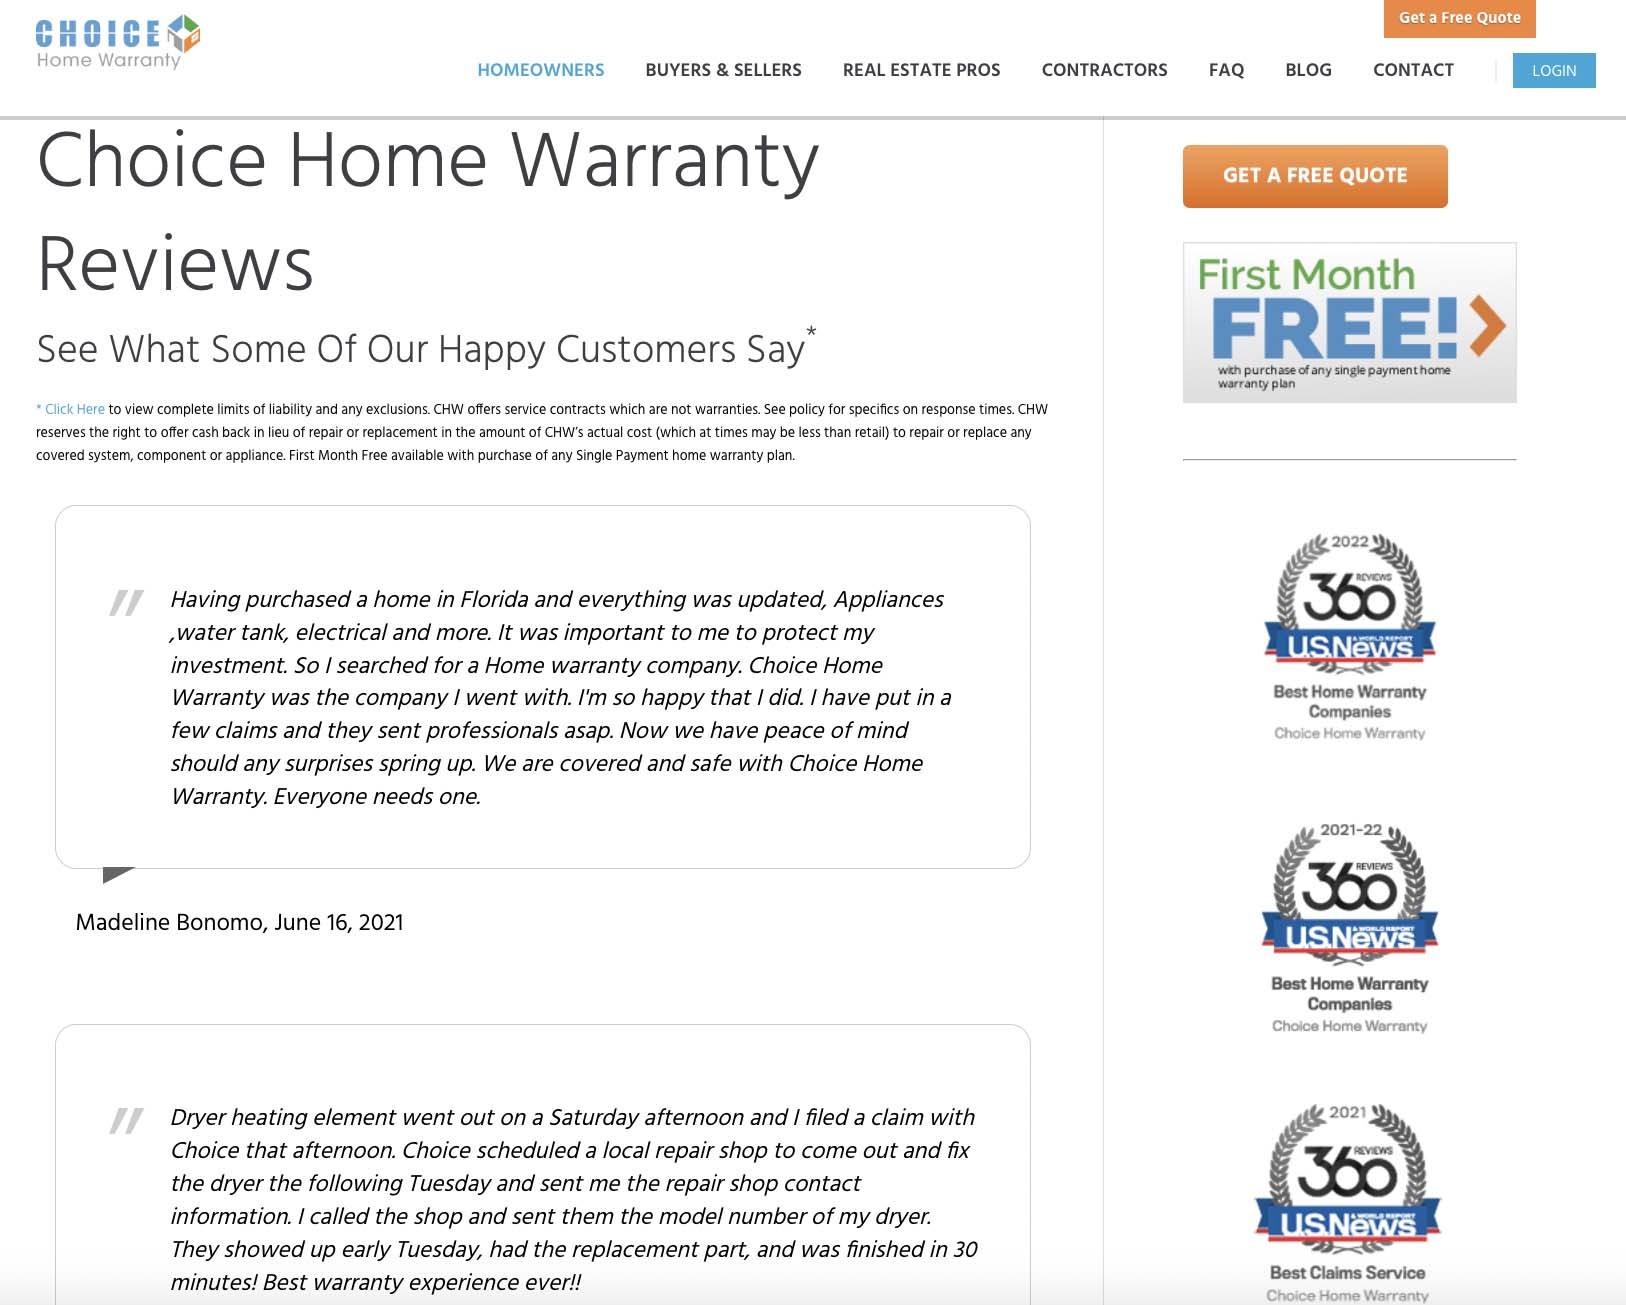 Choice Home Warranty Review - Reviews